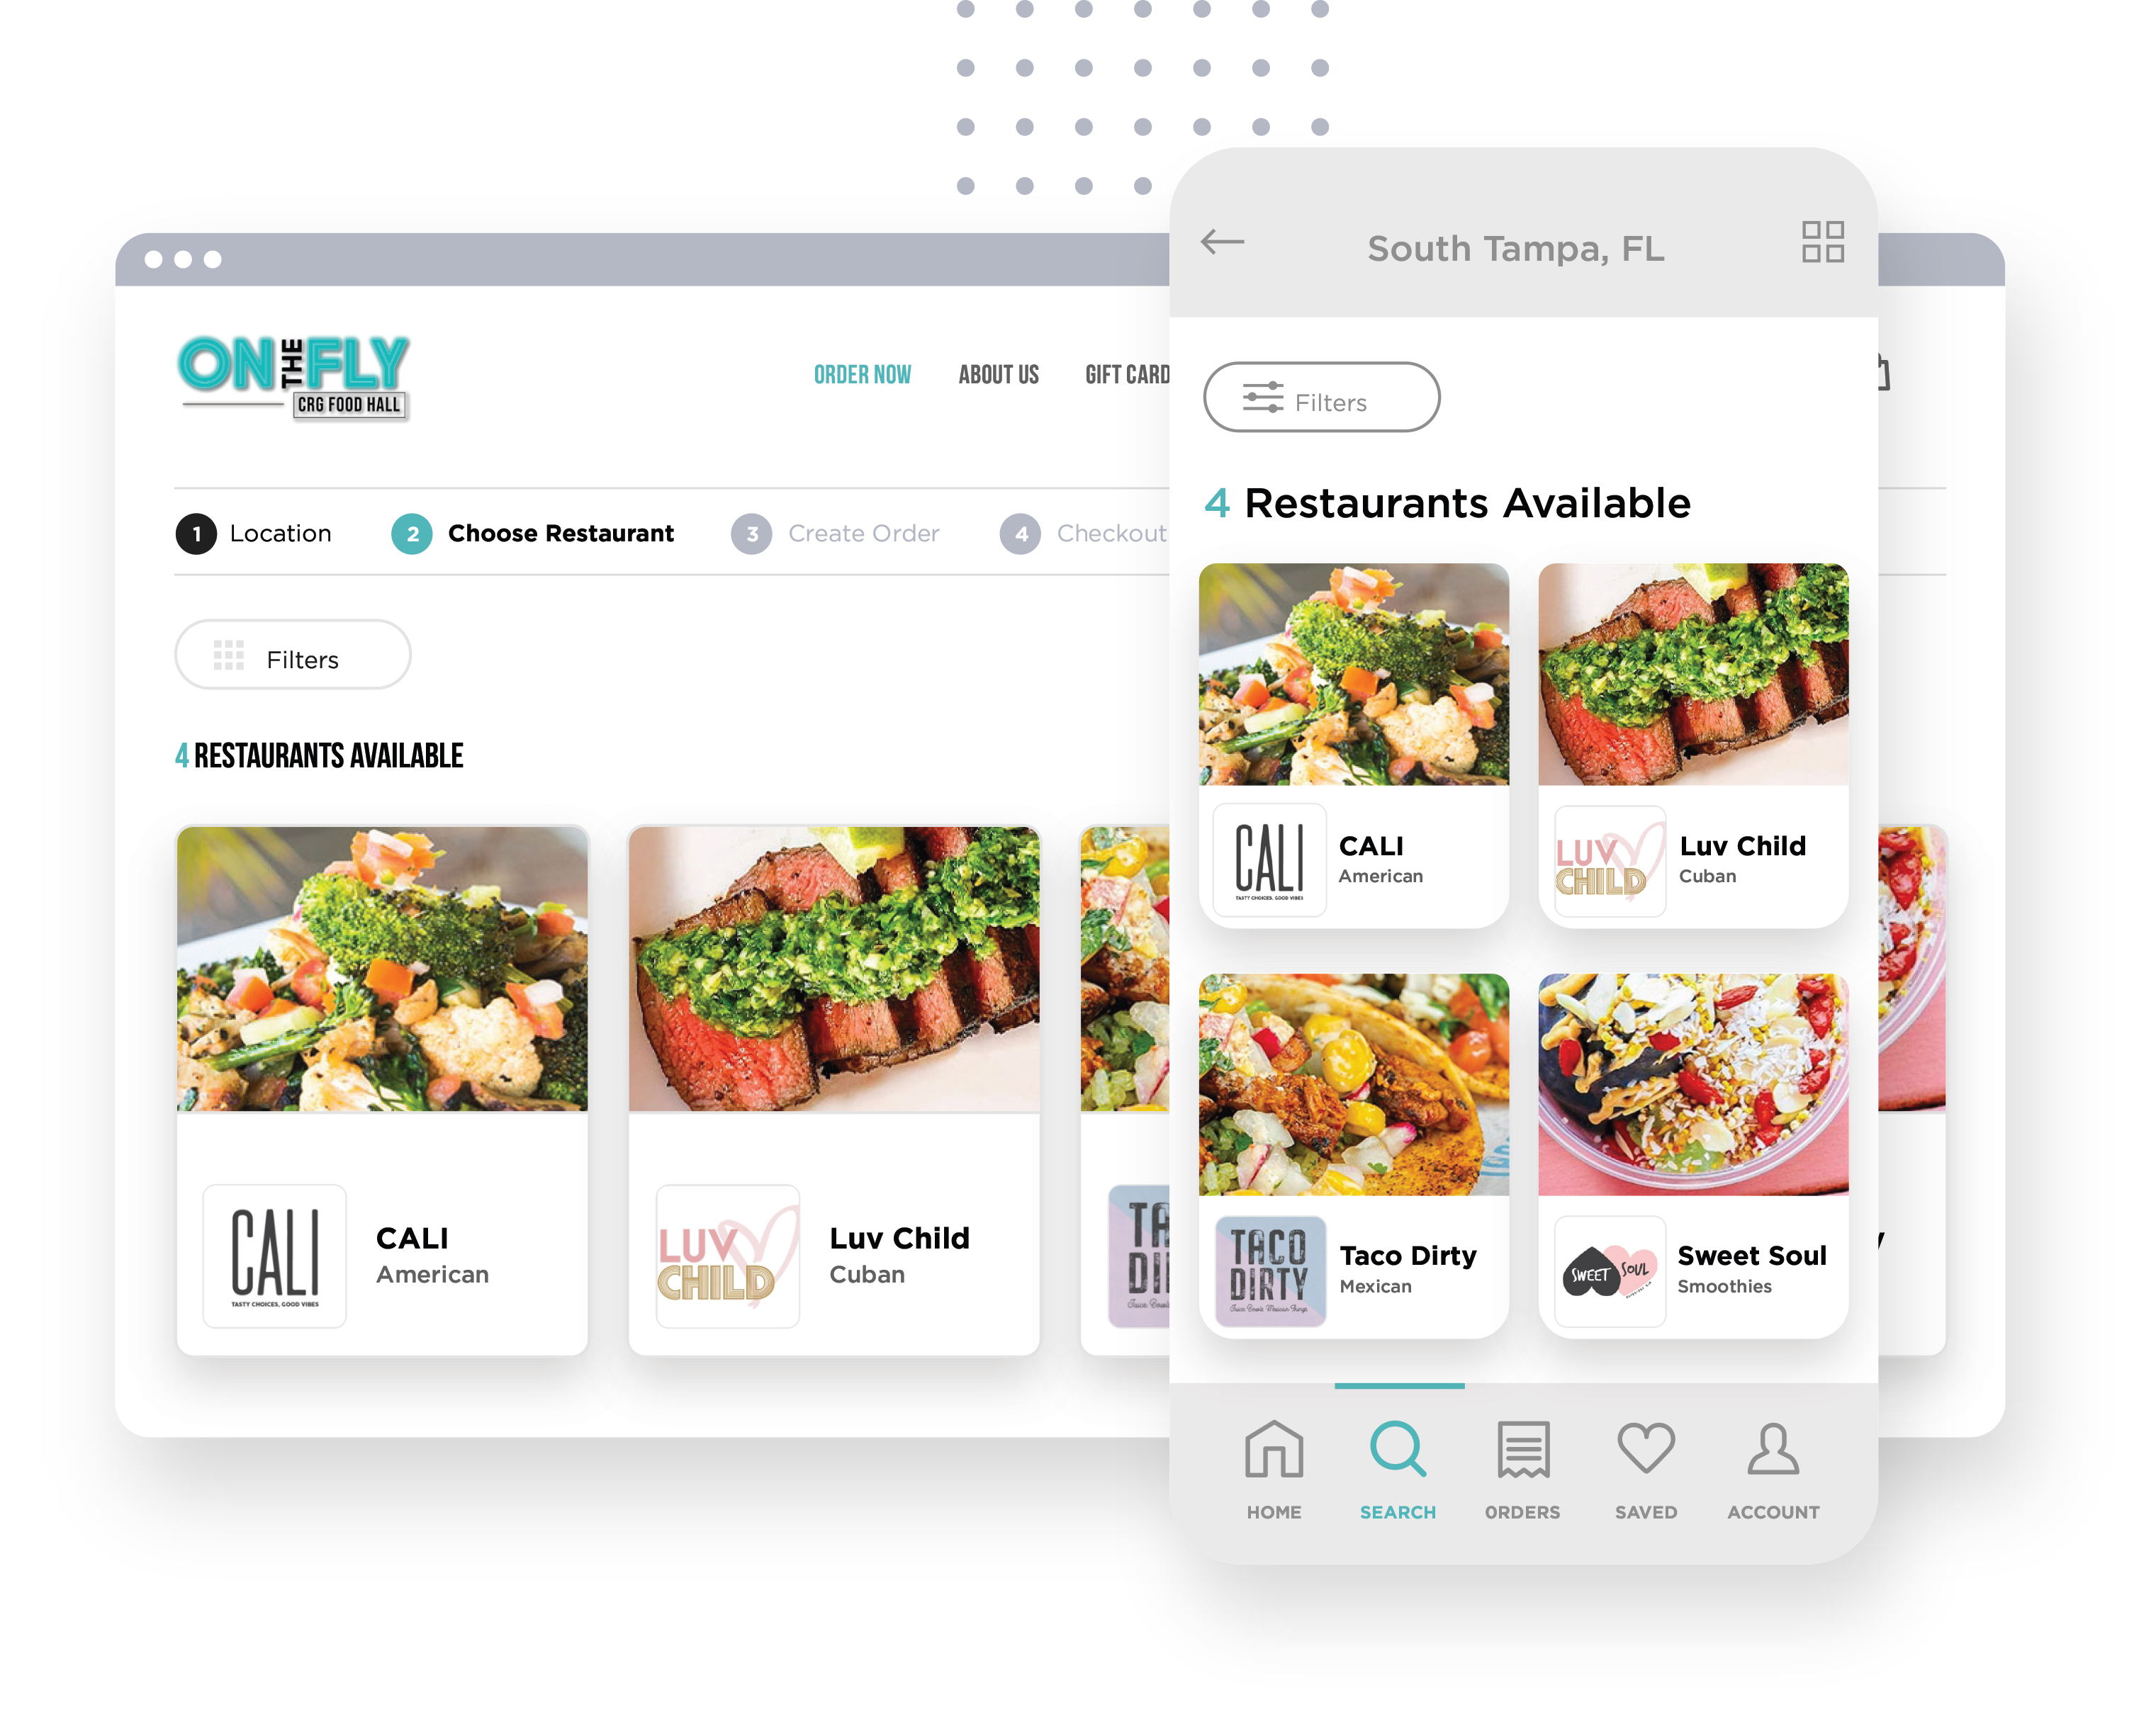 improving online ordering experience for restaurants and customers